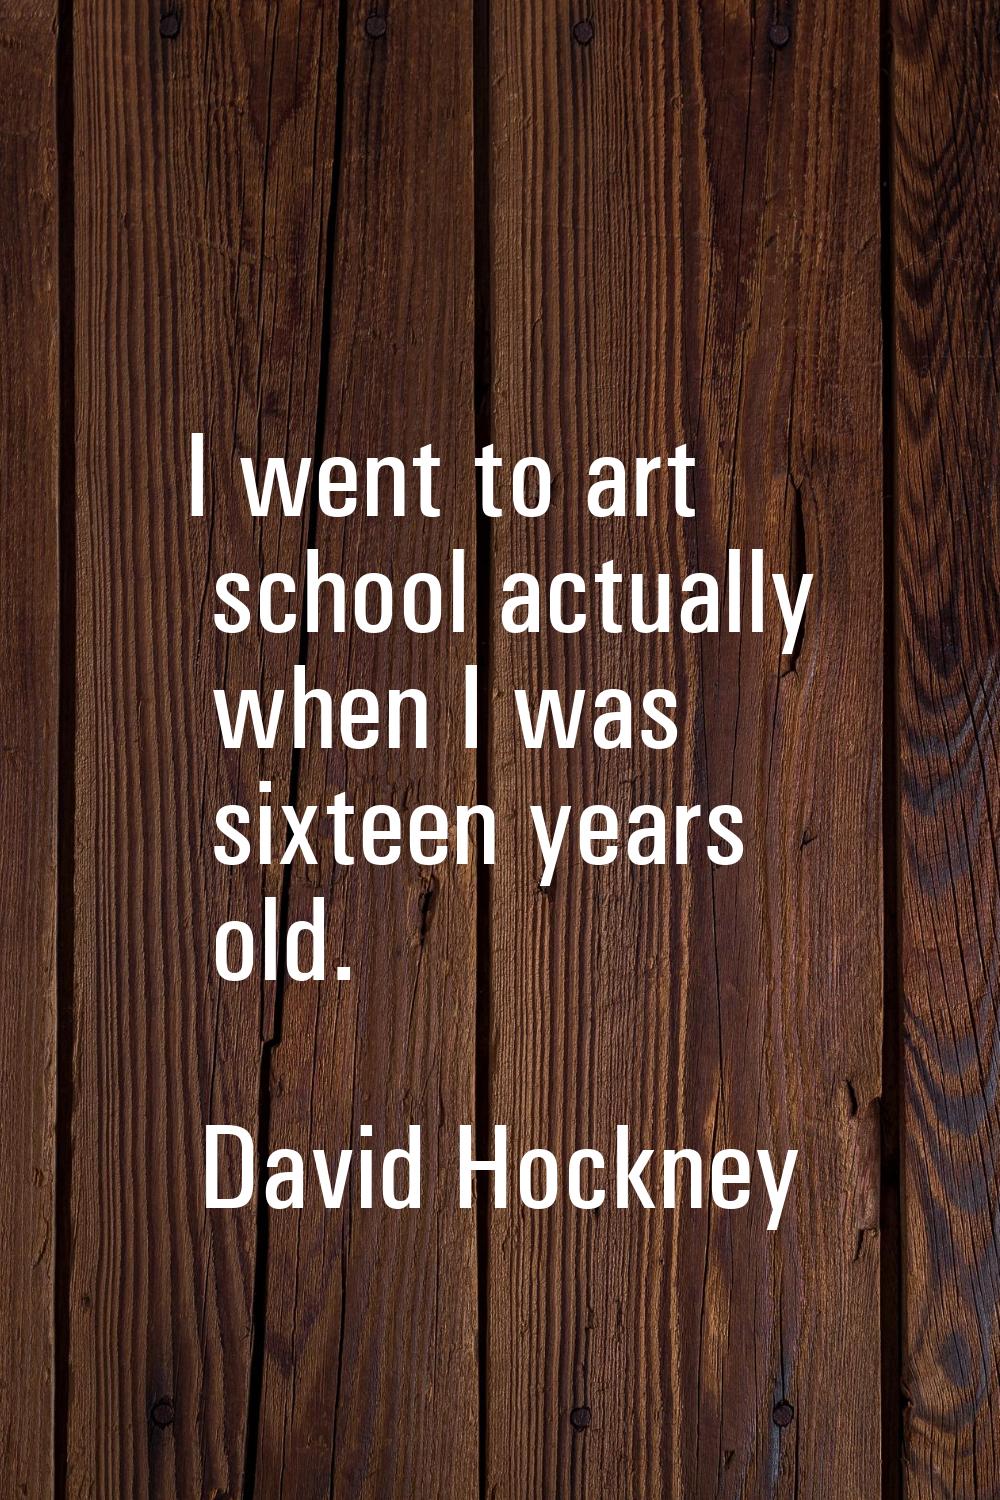 I went to art school actually when I was sixteen years old.